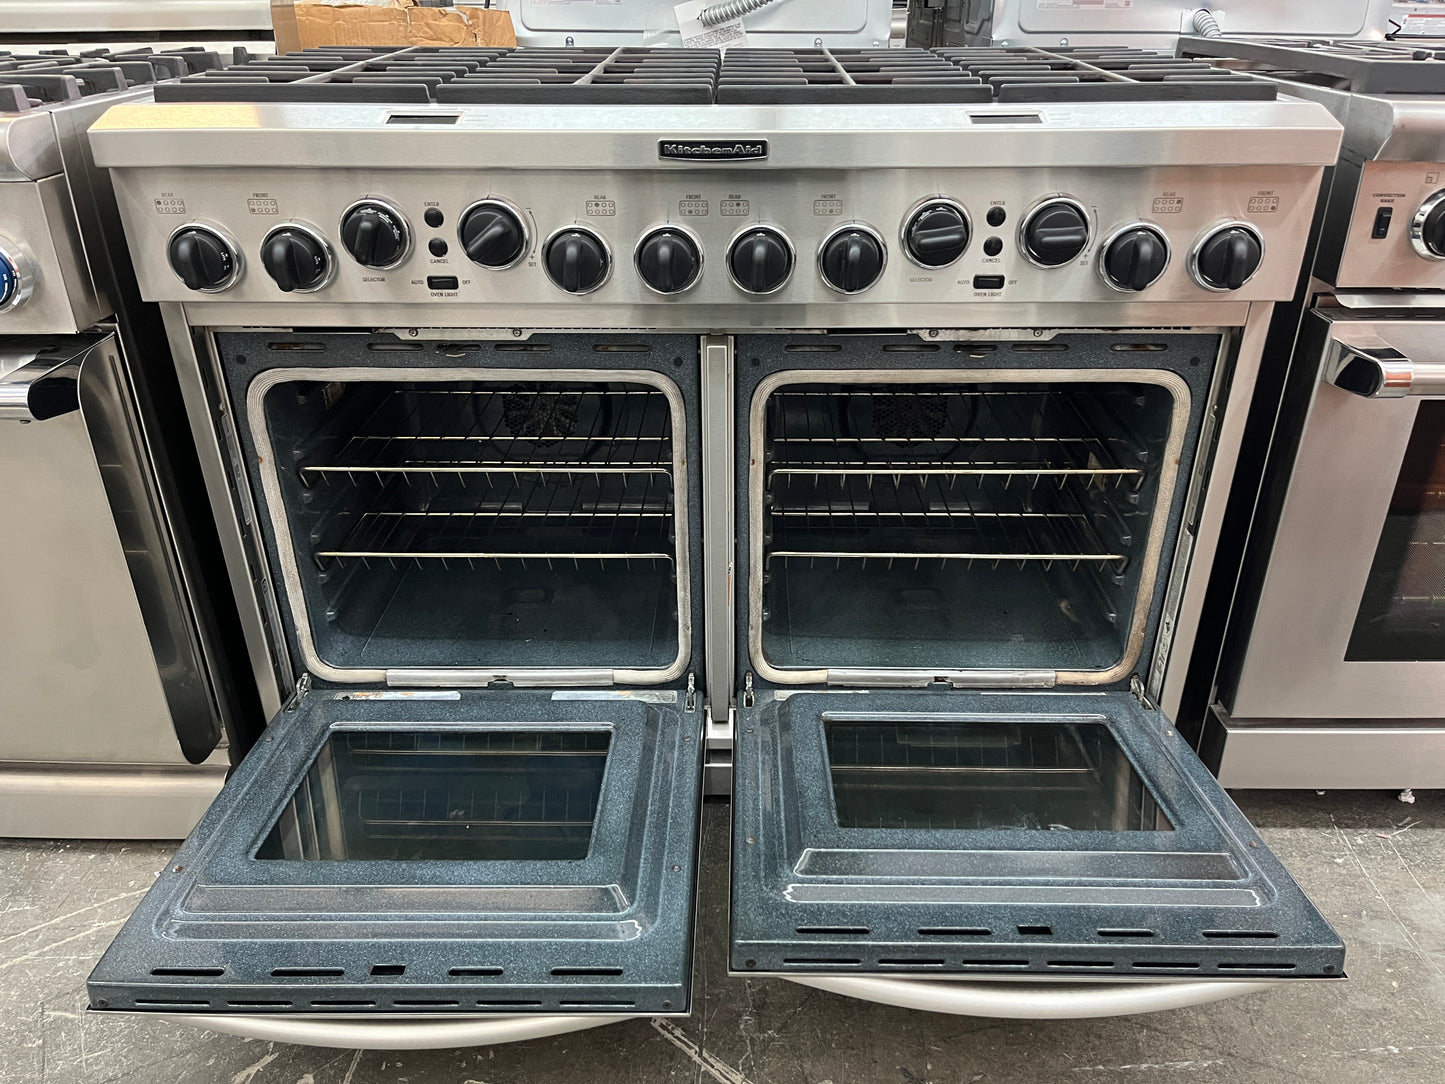 Kitchenaid 48 Inch KDRP487MSS Professional Gas Dual Fuel 8 Burner Range Stainless Steel KDRP487MS,6-15,000,2-6,000 BTU Burners,True Convection Ovens, 888025